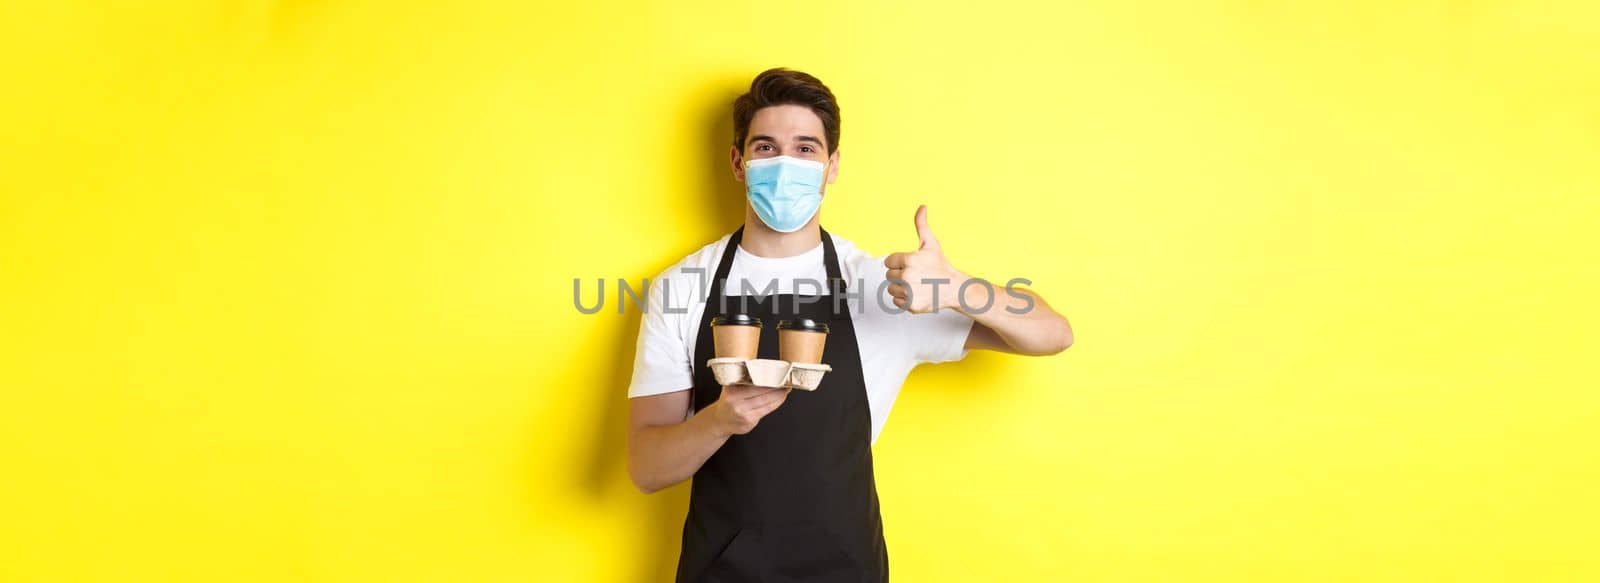 Concept of covid-19, cafe and social distancing. Young male barista in medical mask and black apron holding takeaway coffee cups, showing thumb up, yellow background.